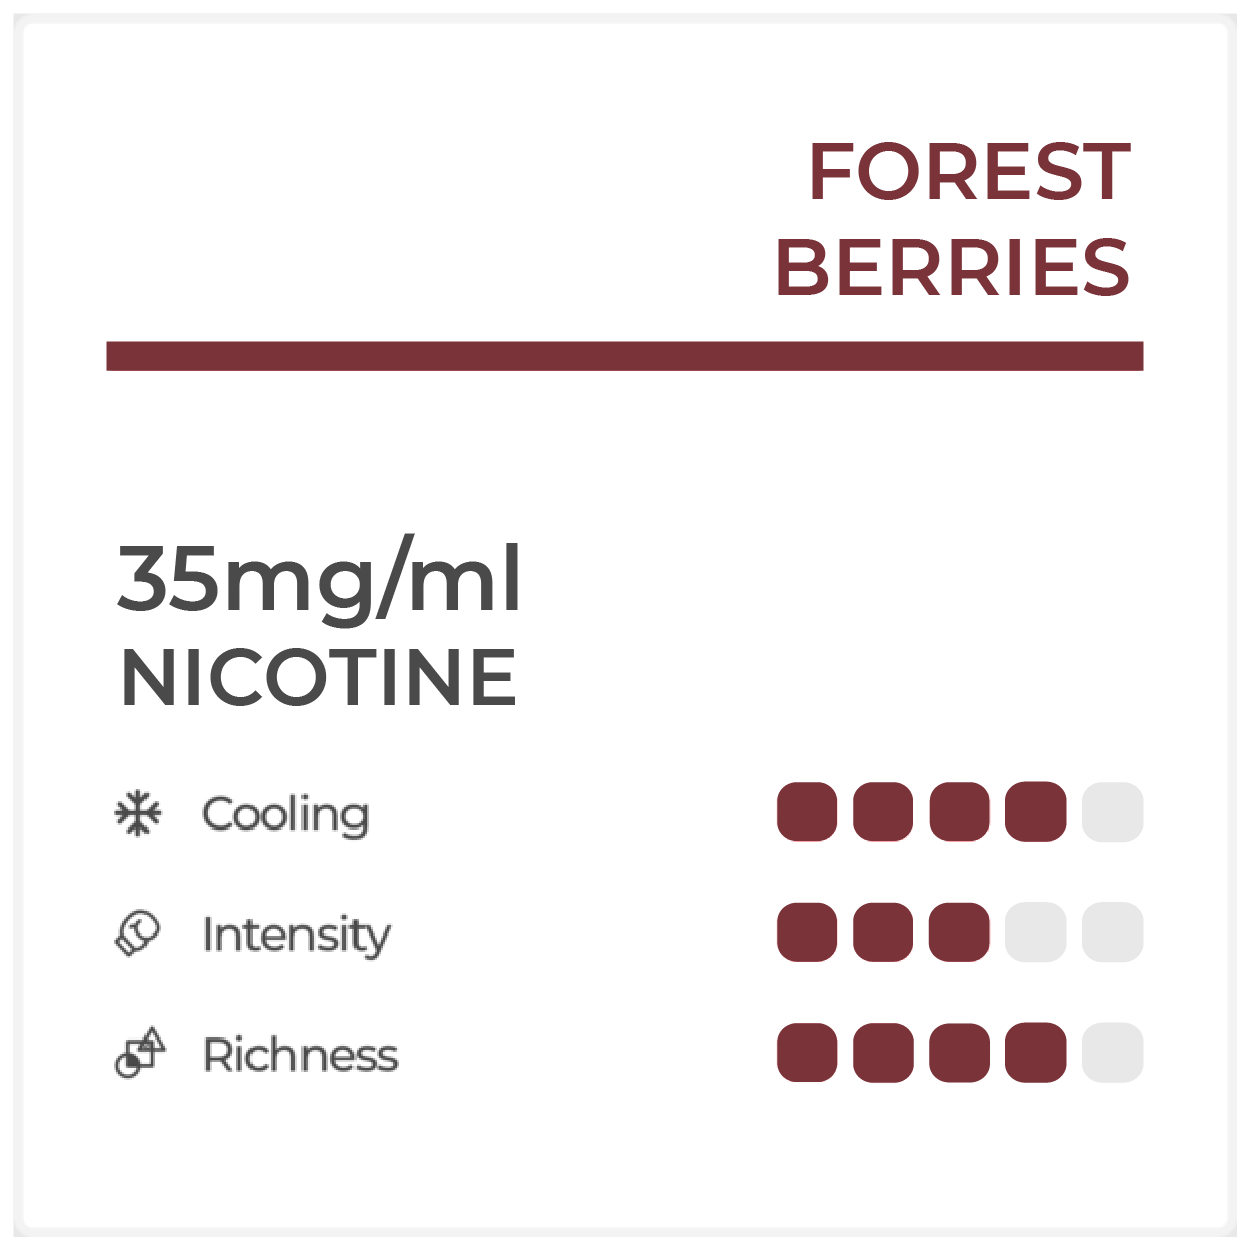 Forest Berries (Carton) 35mg/mL